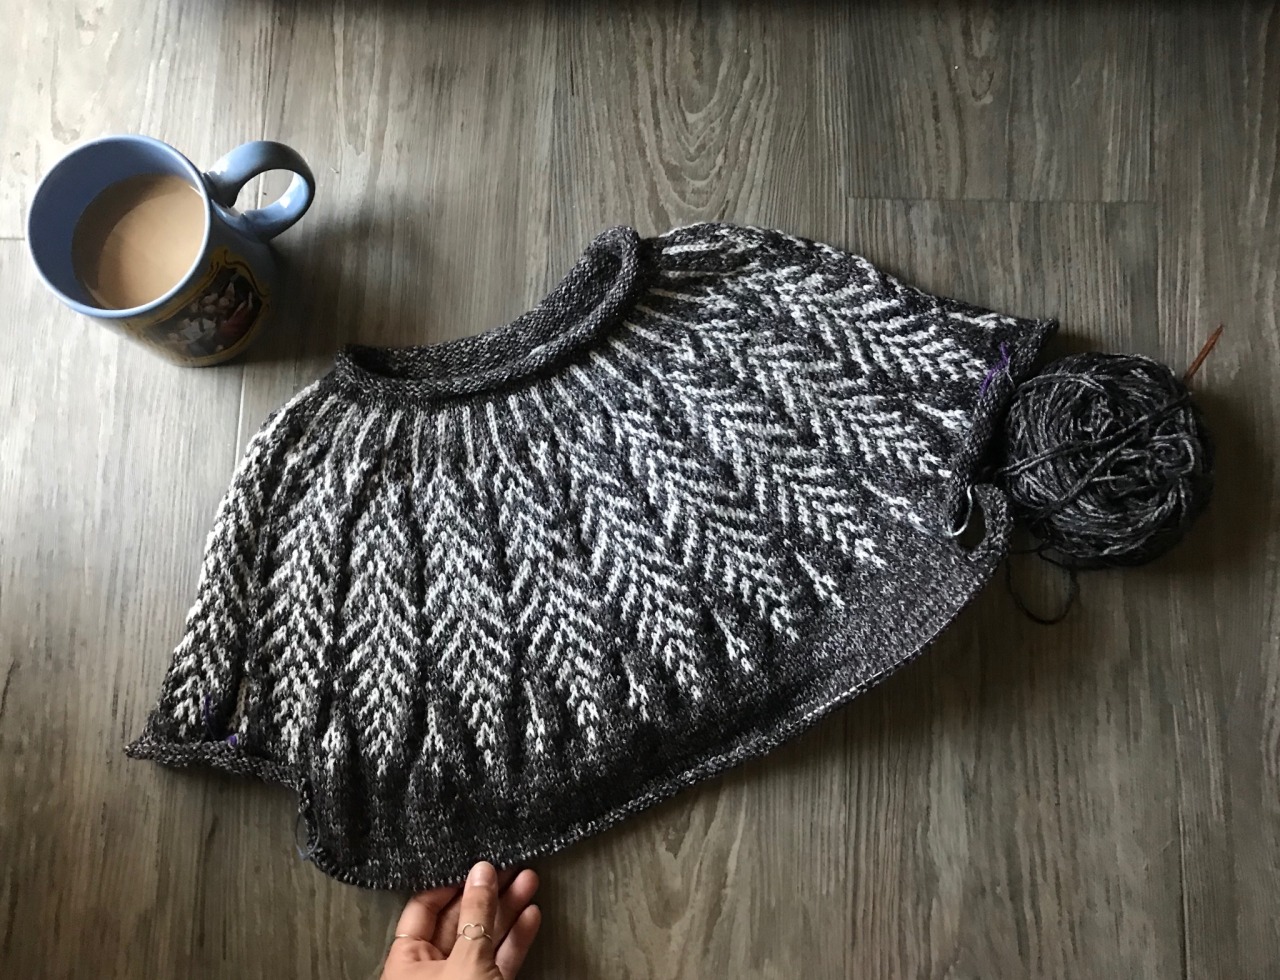 Knittaz-For-Life — Go knit this beautiful pattern!!! I loved every